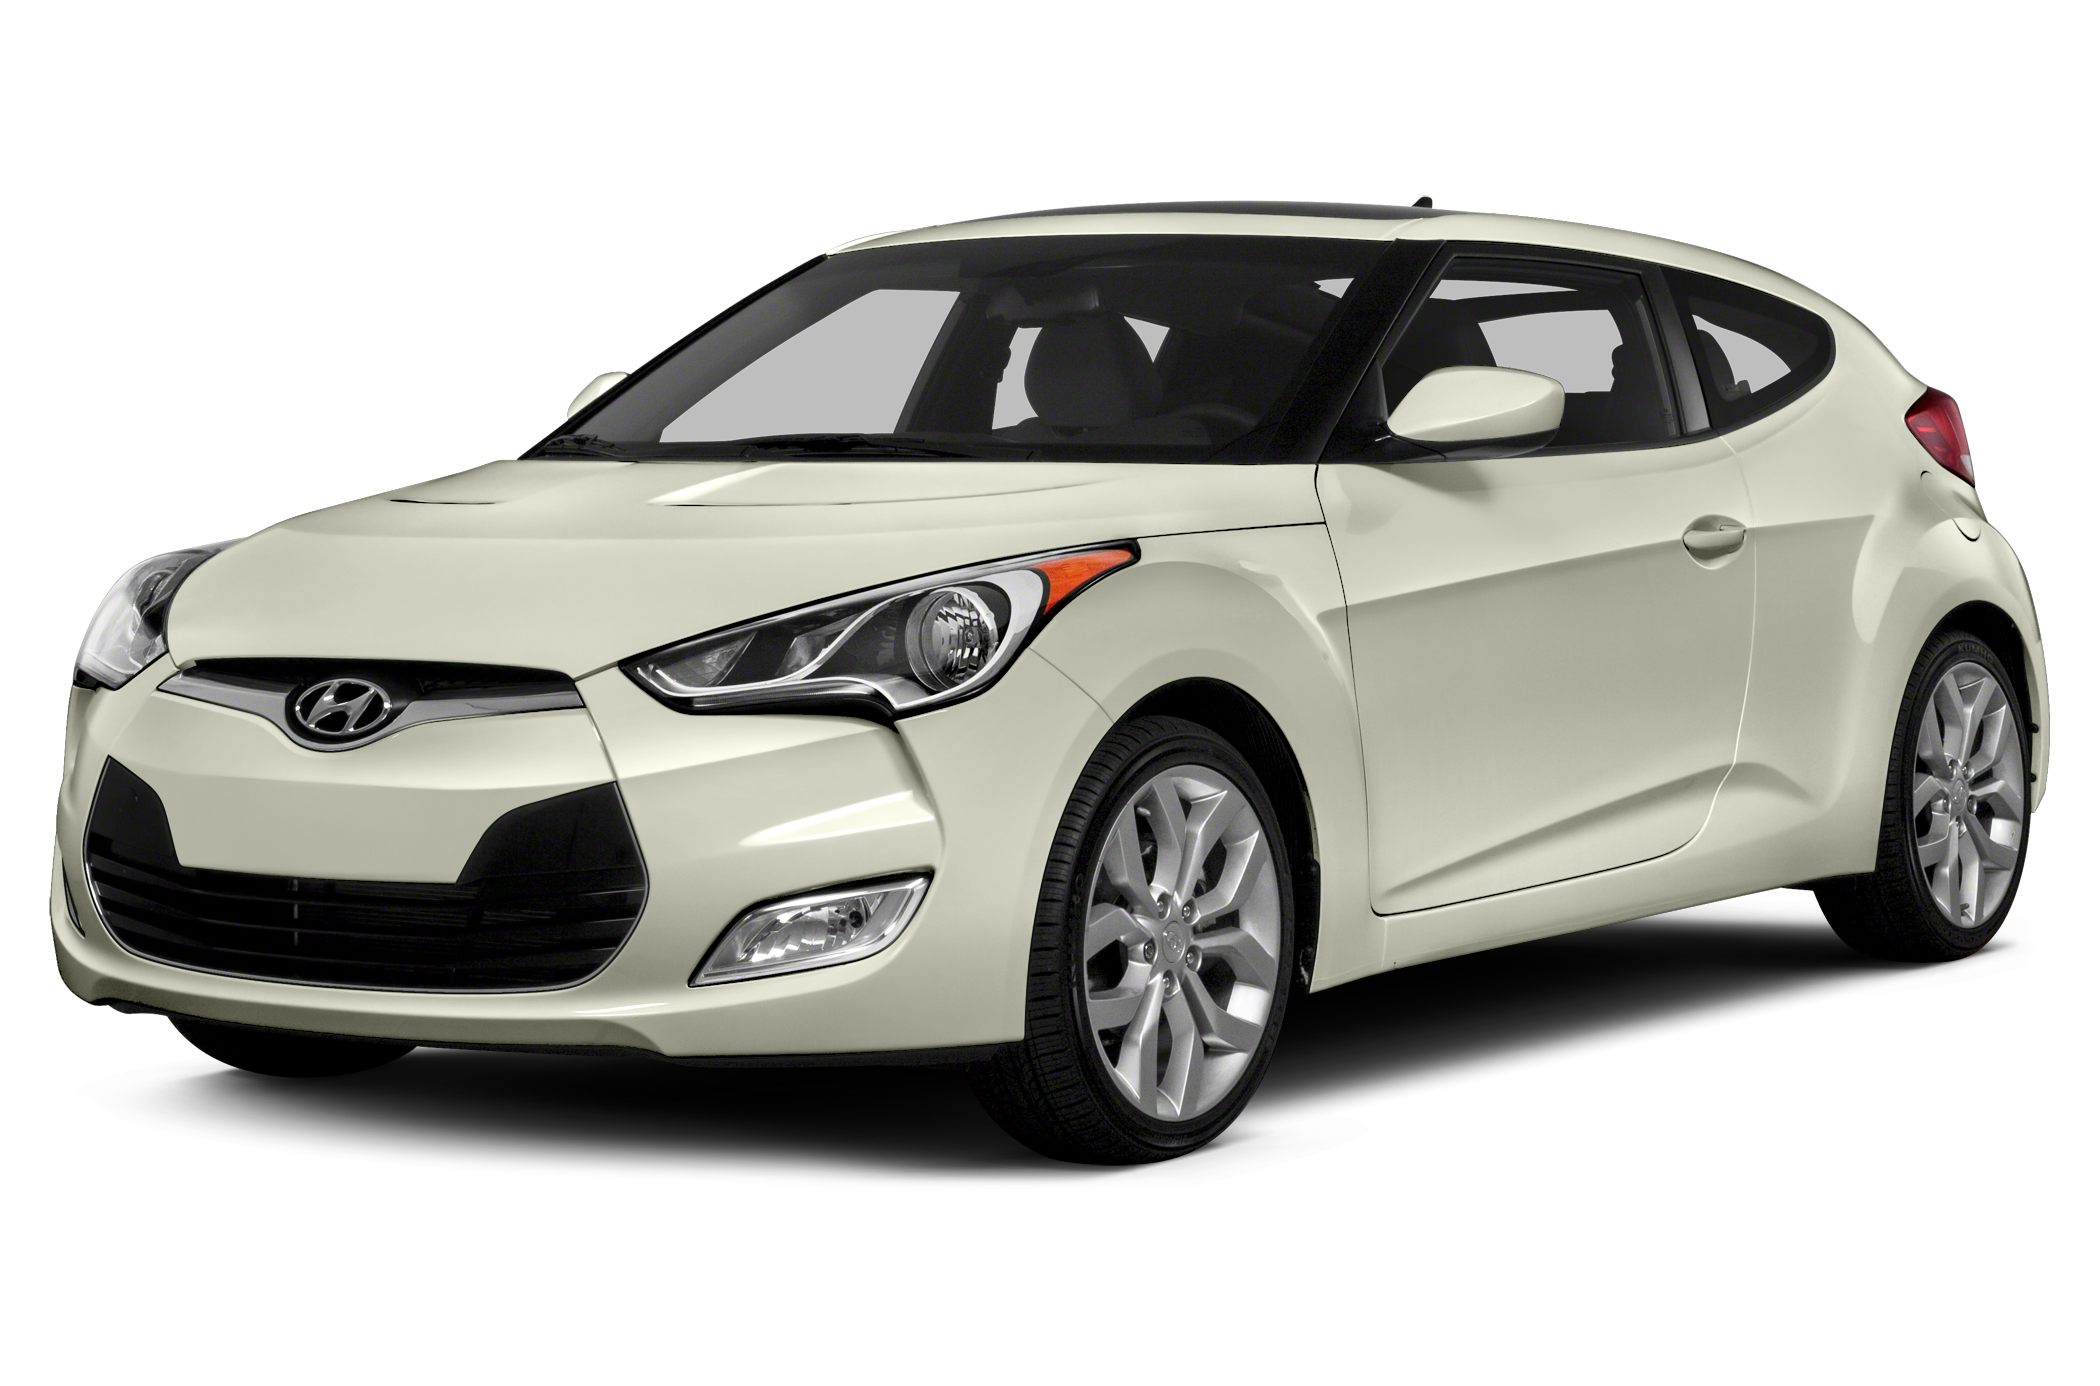 2014 Hyundai Veloster oem parts and accessories on sale